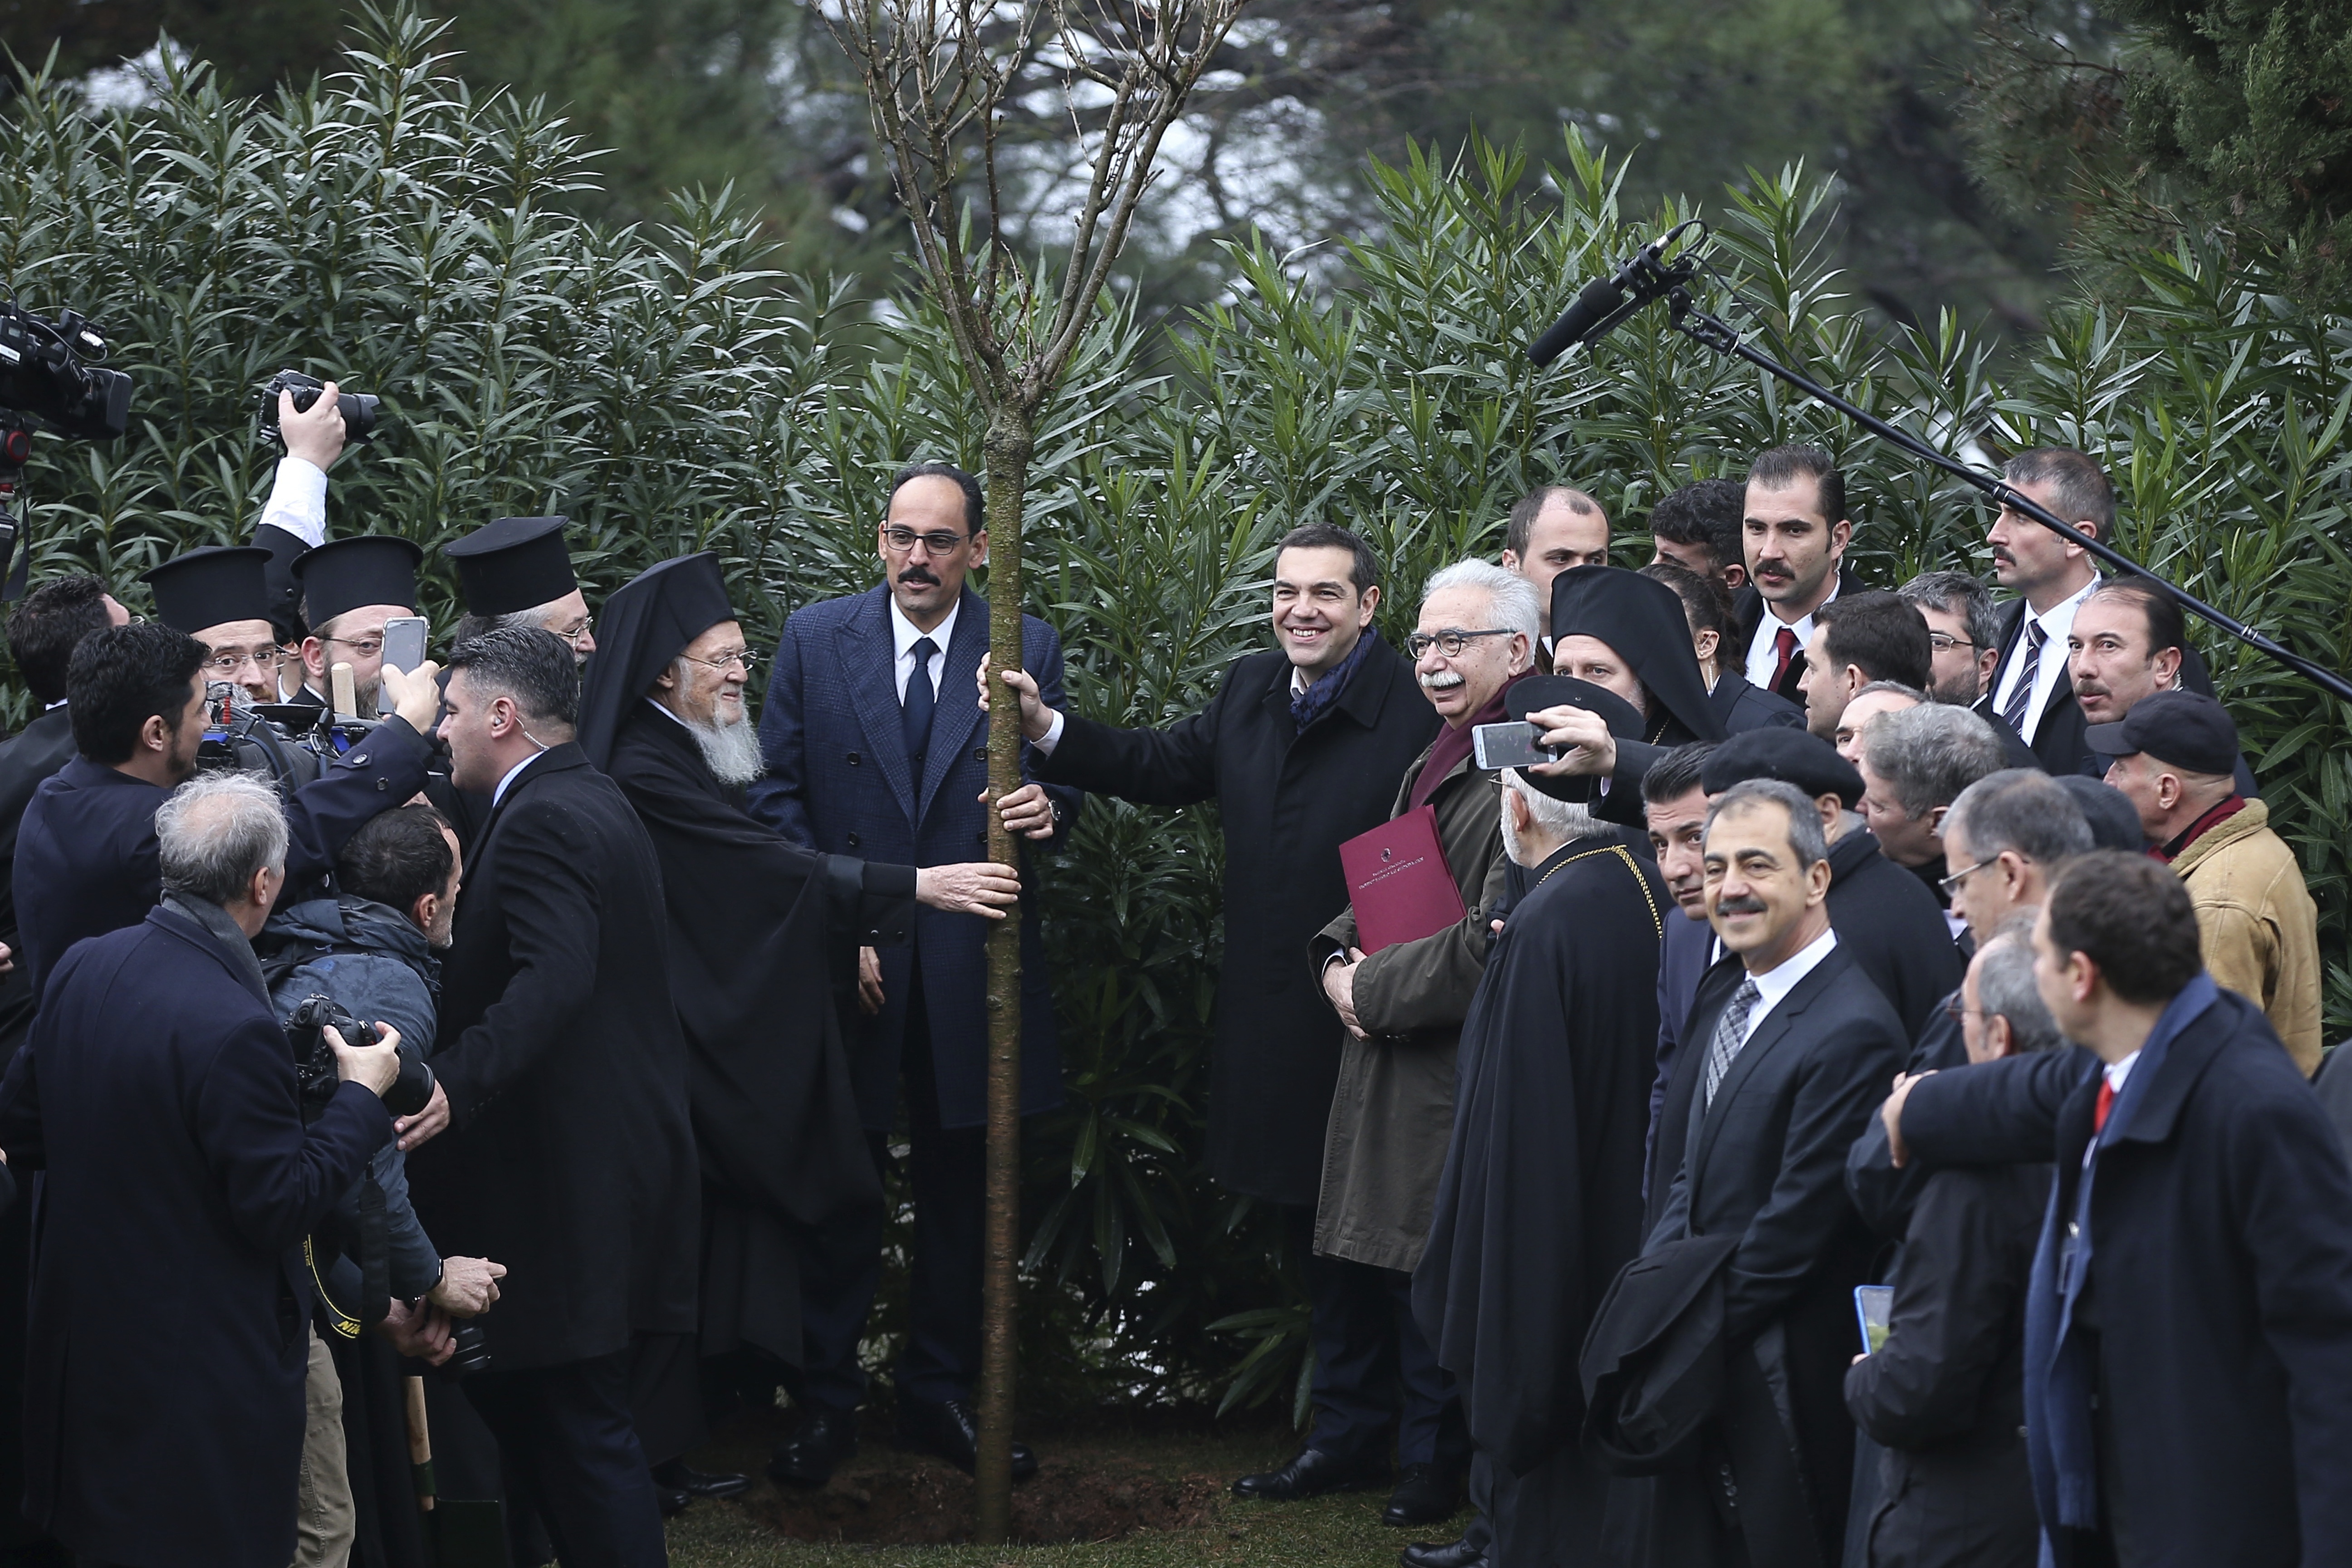 Greece's Prime Minister Alexis Tsipras, right, and Ecumenical Patriarch Bartholomew I, left, hold a tree during their visit at the Theological School of Halki, in Heybeli Island, near Istanbul, Wednesday, Feb. 6, 2019. The president of Turkey and the prime minister of Greece agreed Tuesday on the need to keep 